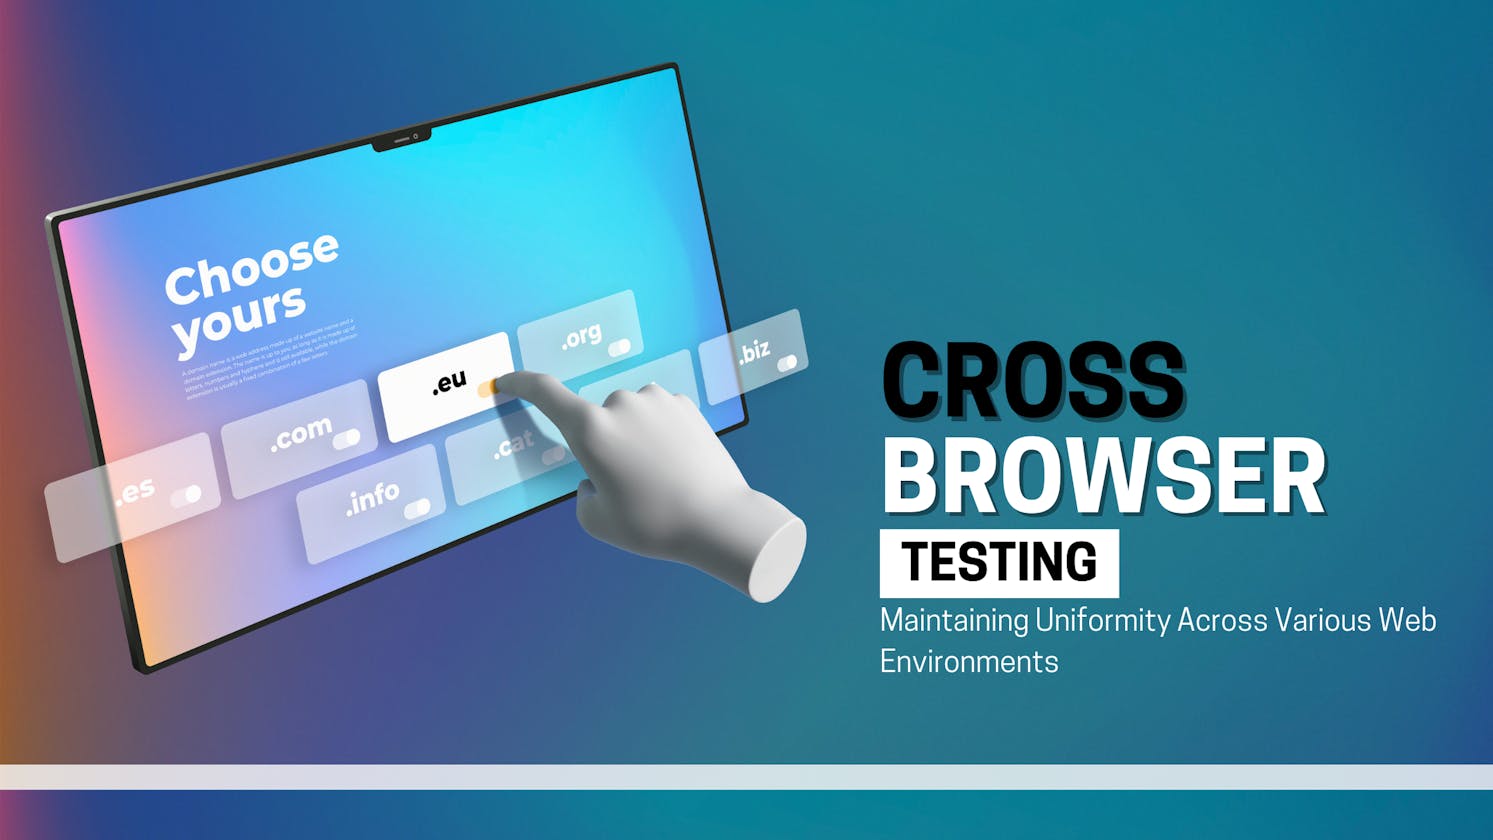 Cross-browser Testing: Ensuring Consistency In Different Web Environments